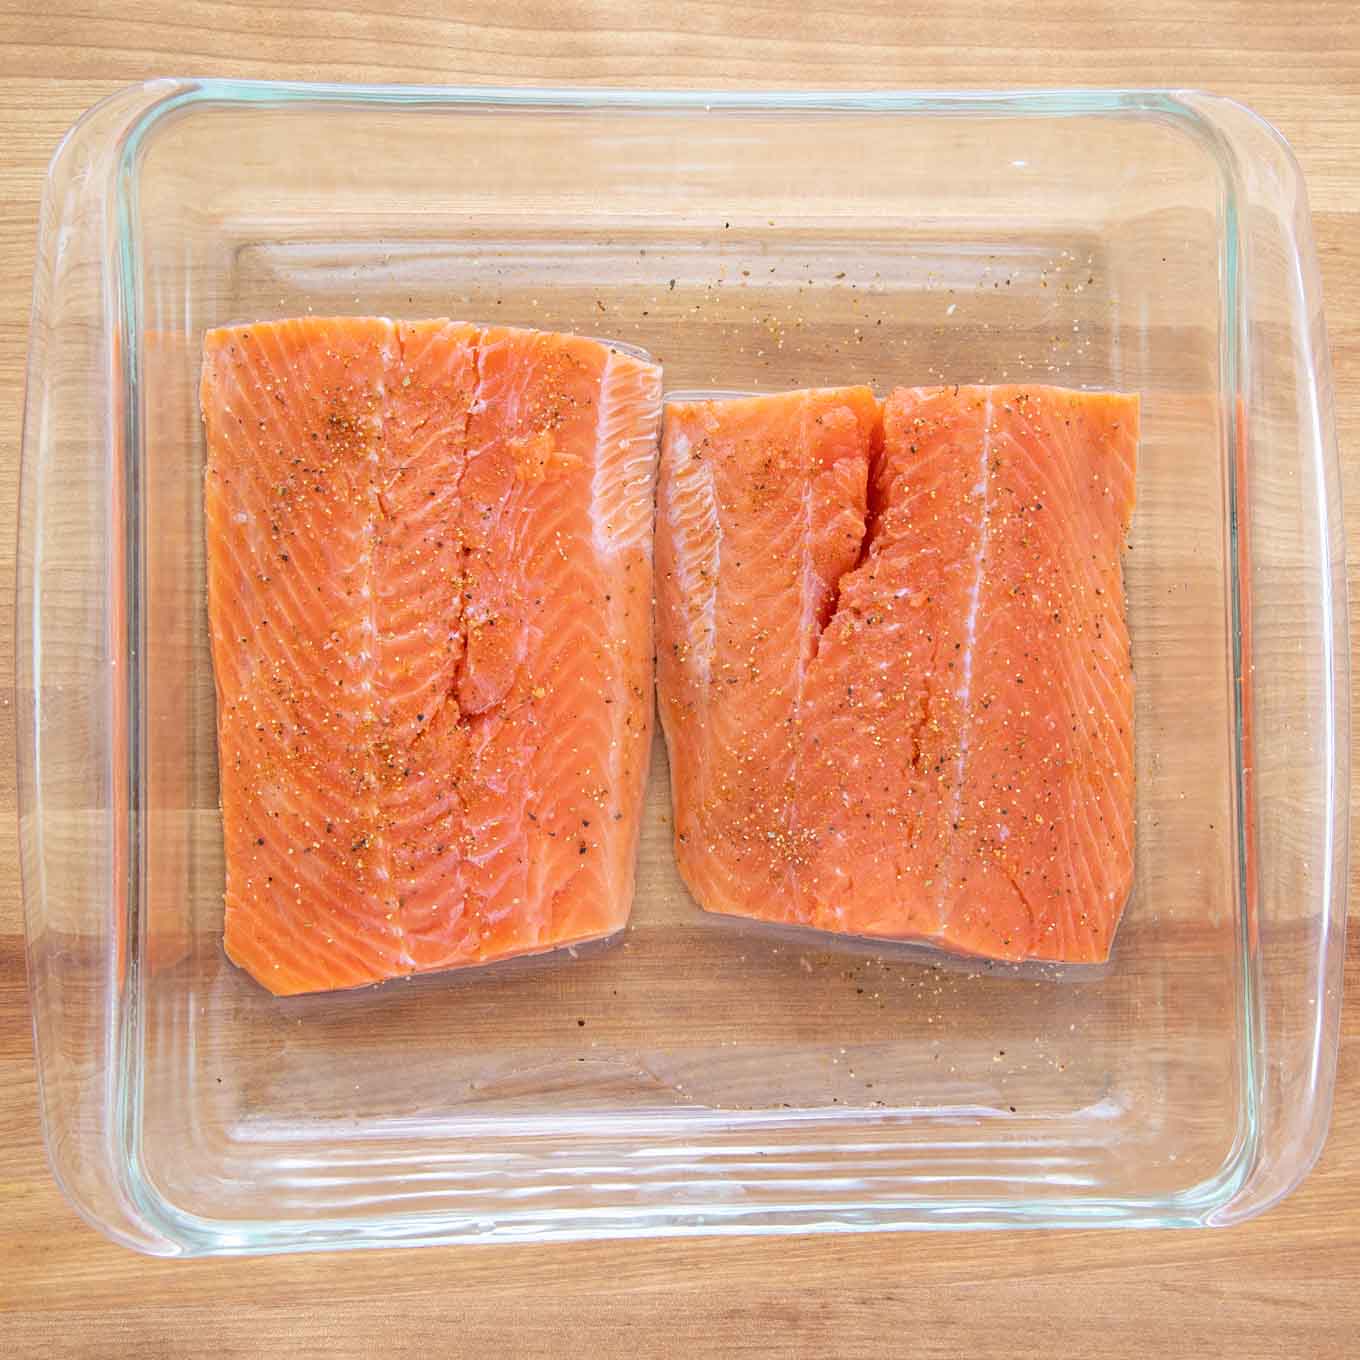  salmon fillets seasoned with sea salt and black pepper in a glass baking dish